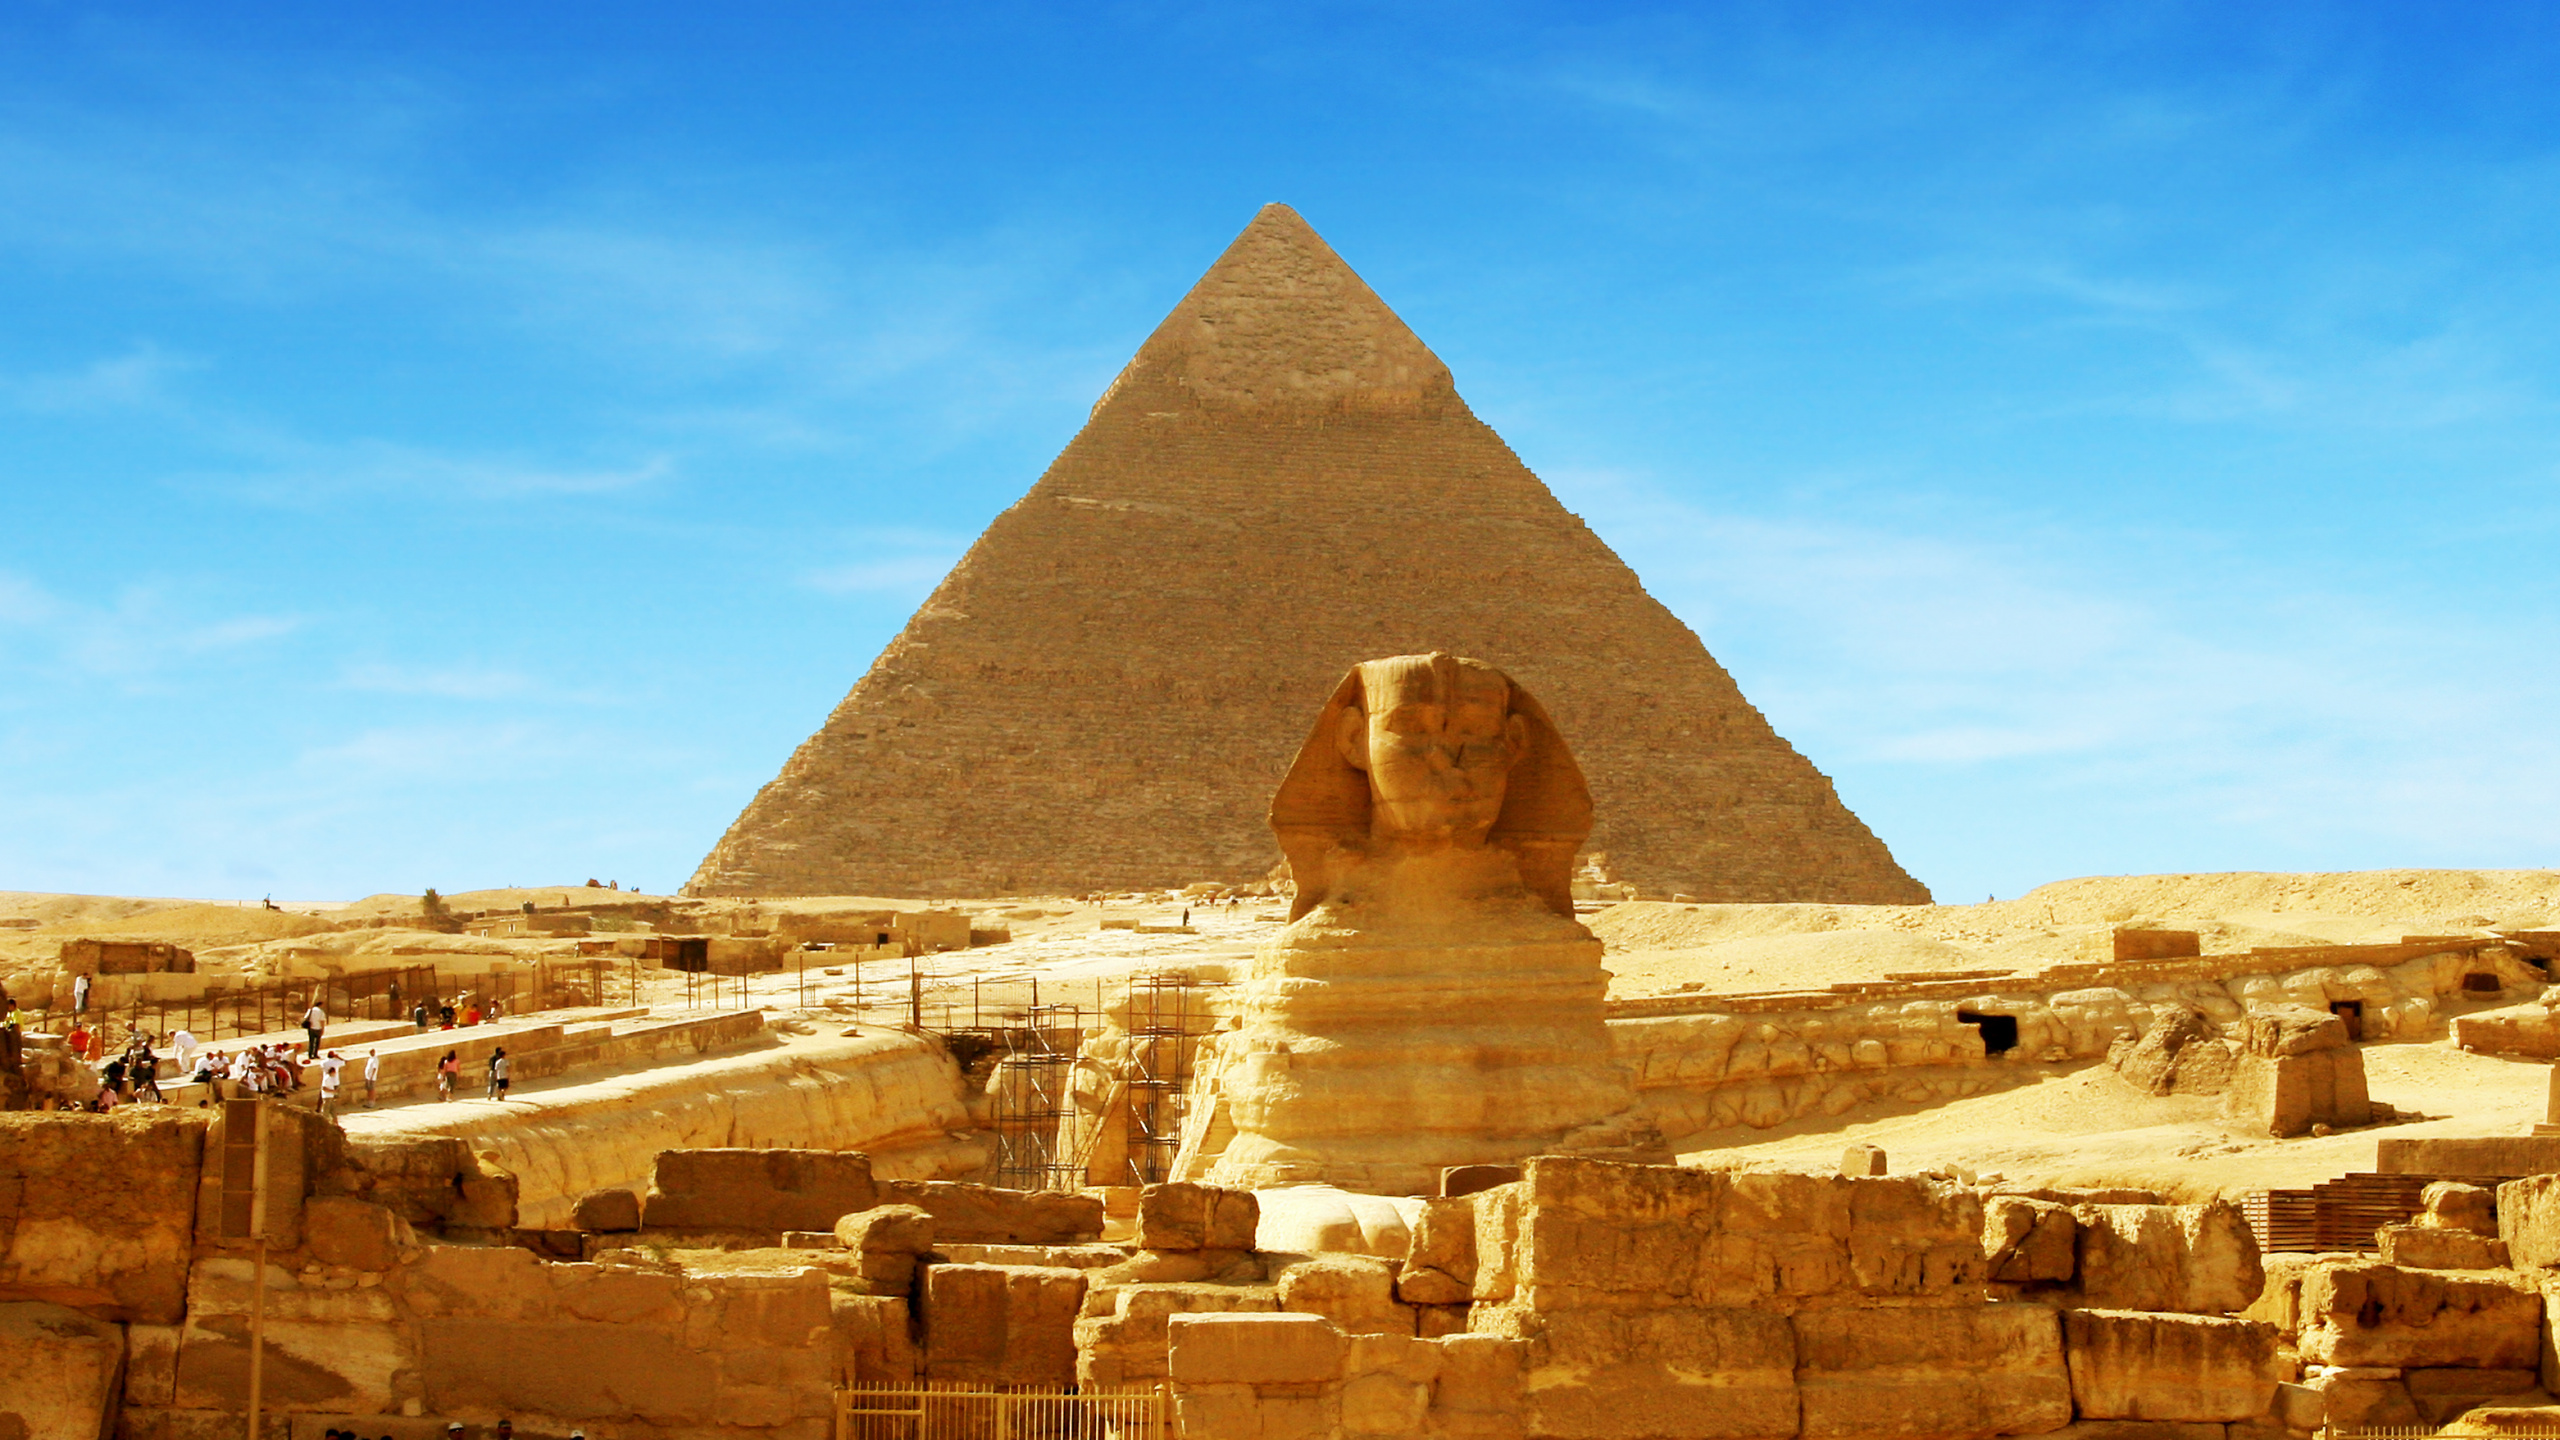 Pyramid of Giza Under Blue Sky During Daytime. Wallpaper in 2560x1440 Resolution